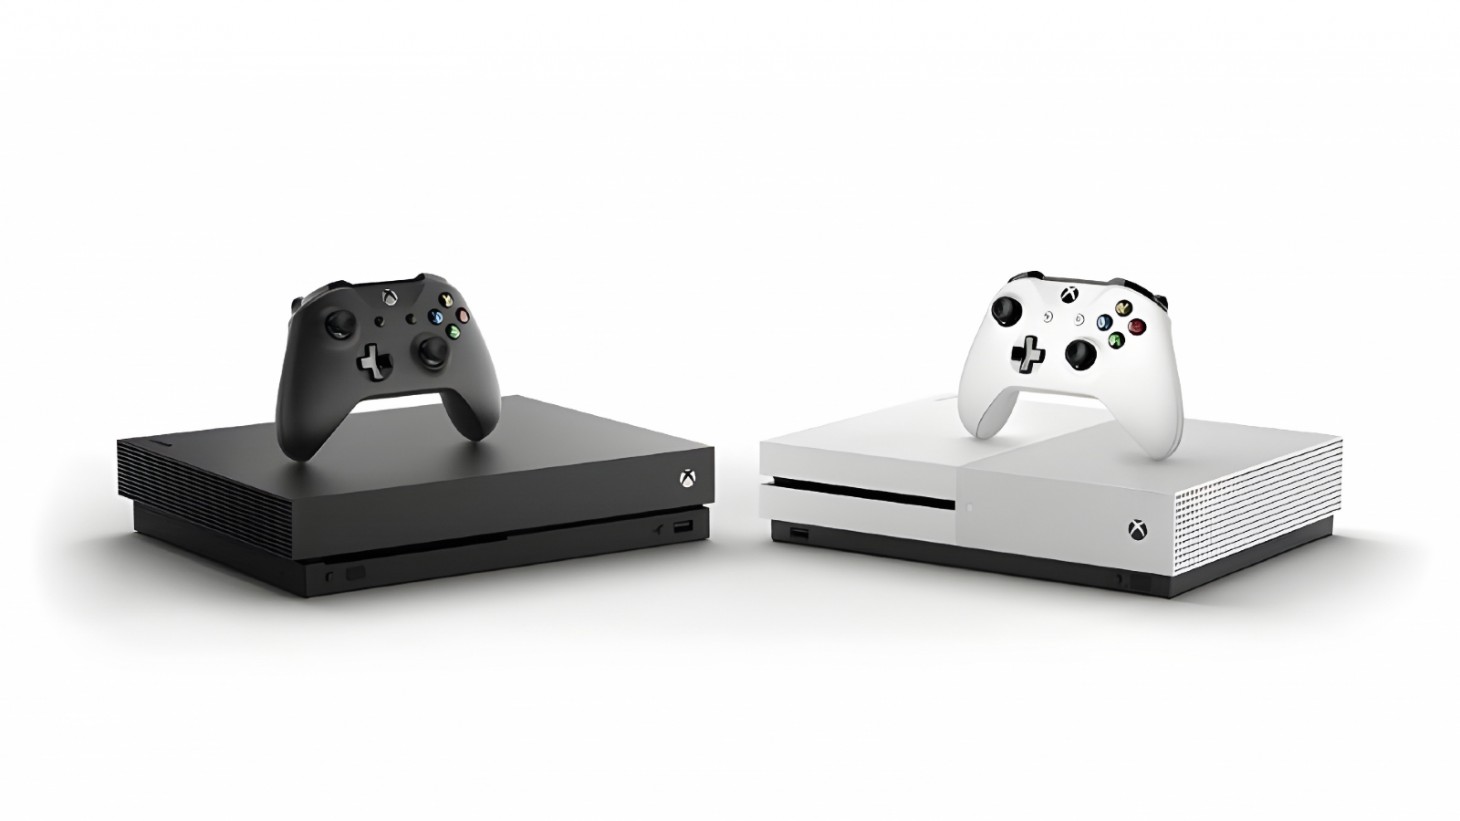 Microsoft is no longer developing Xbox One games — here's what that means